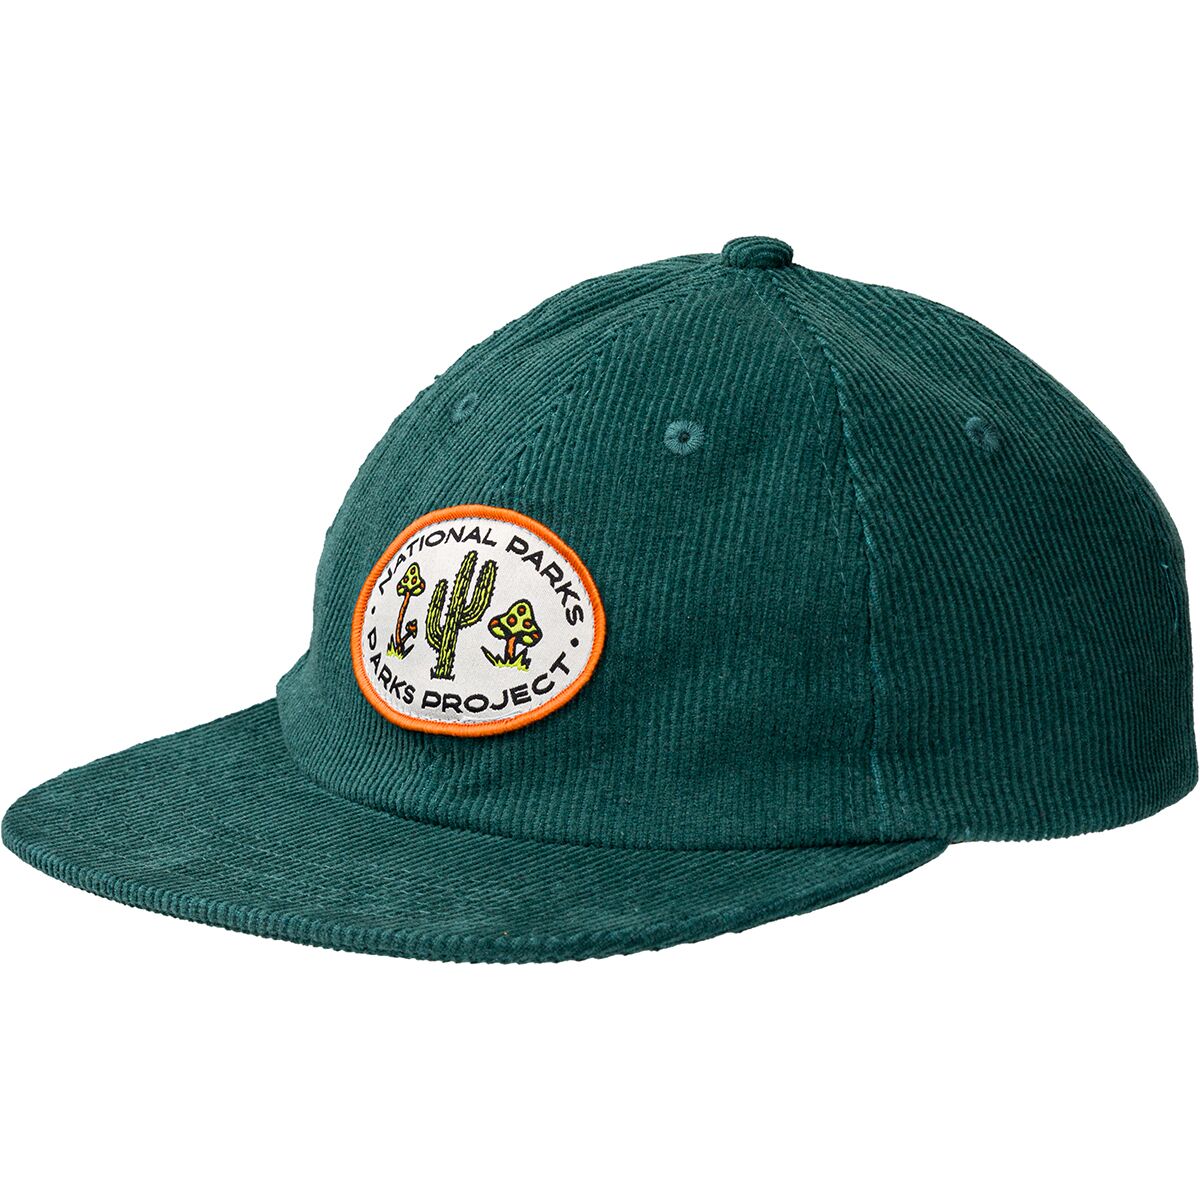 Parks Project Doodle Cactus Cord Baseball Hat